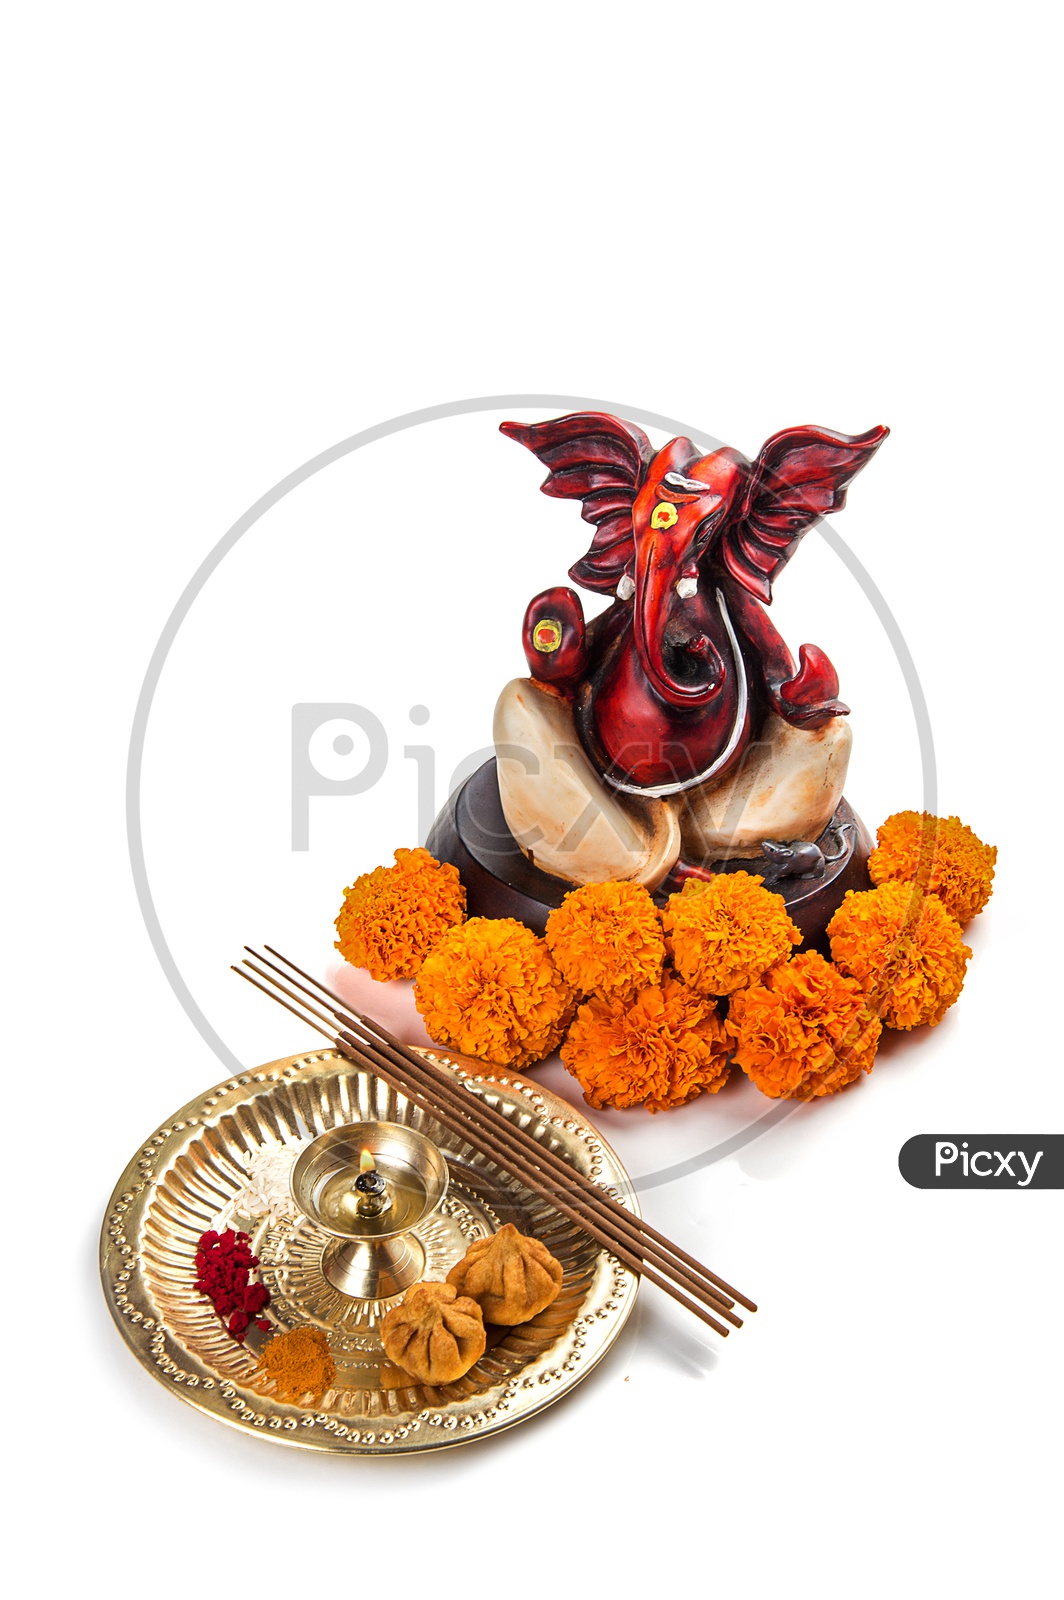 Lord Ganesh Idol with flowers and diya on white background